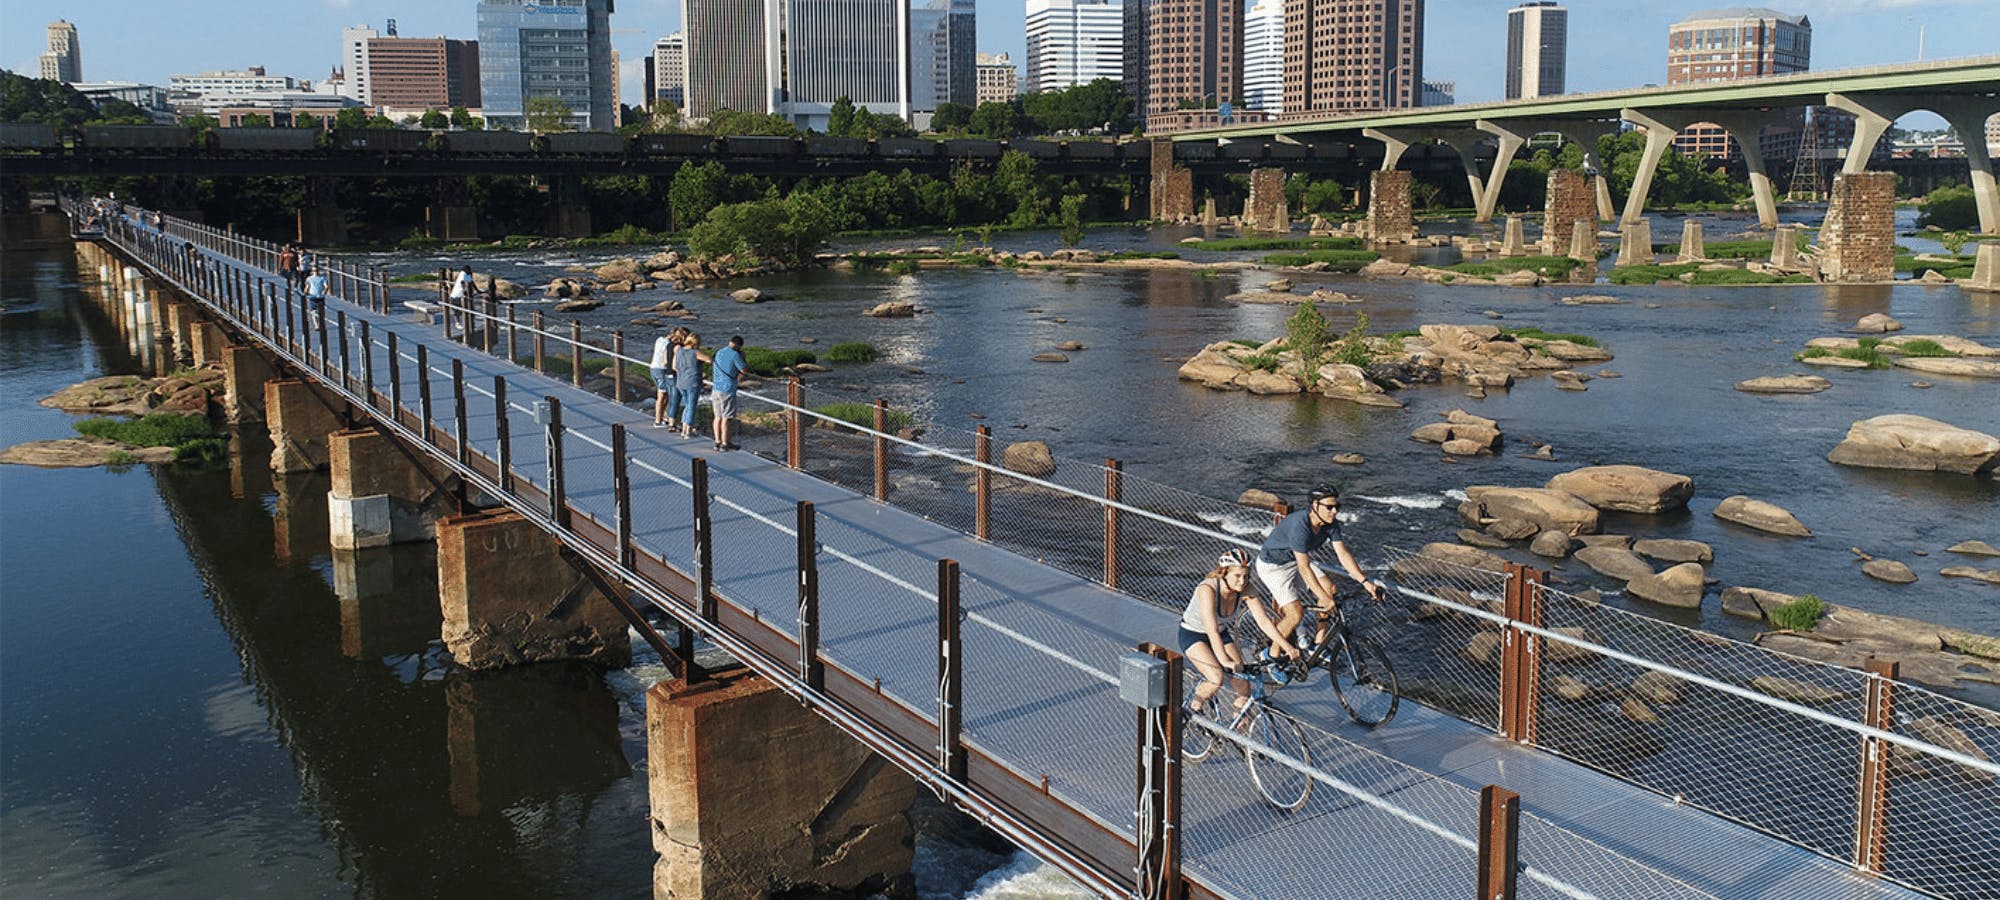 James River Park's Outdoor Amenities in Downtown Richmond